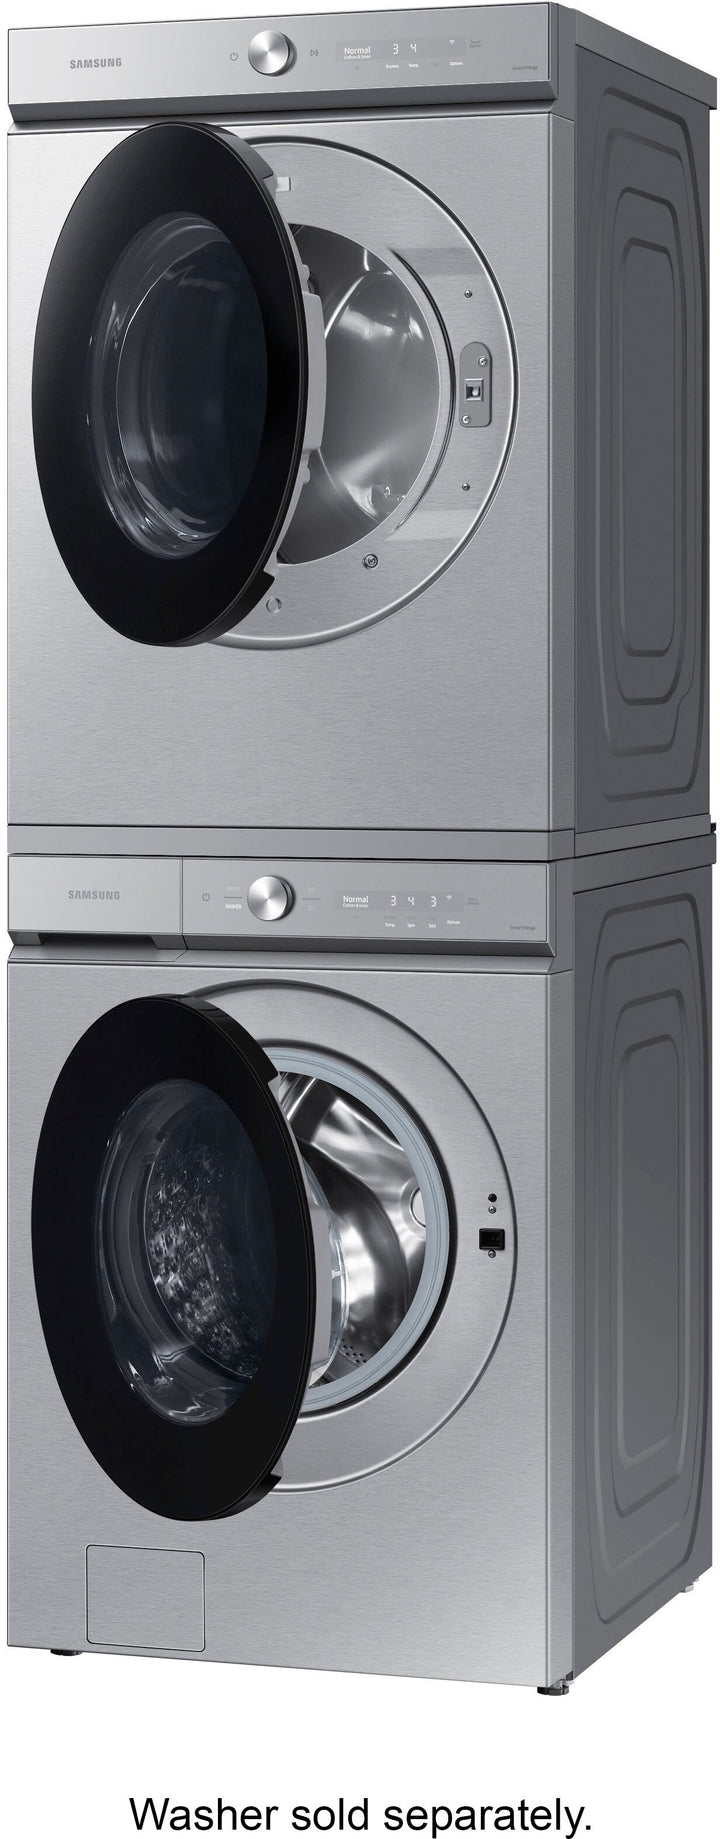 Samsung - Bespoke 7.6 cu. ft. Ultra Capacity Electric Dryer with Super Speed Dry and AI Smart Dial - Silver steel_9